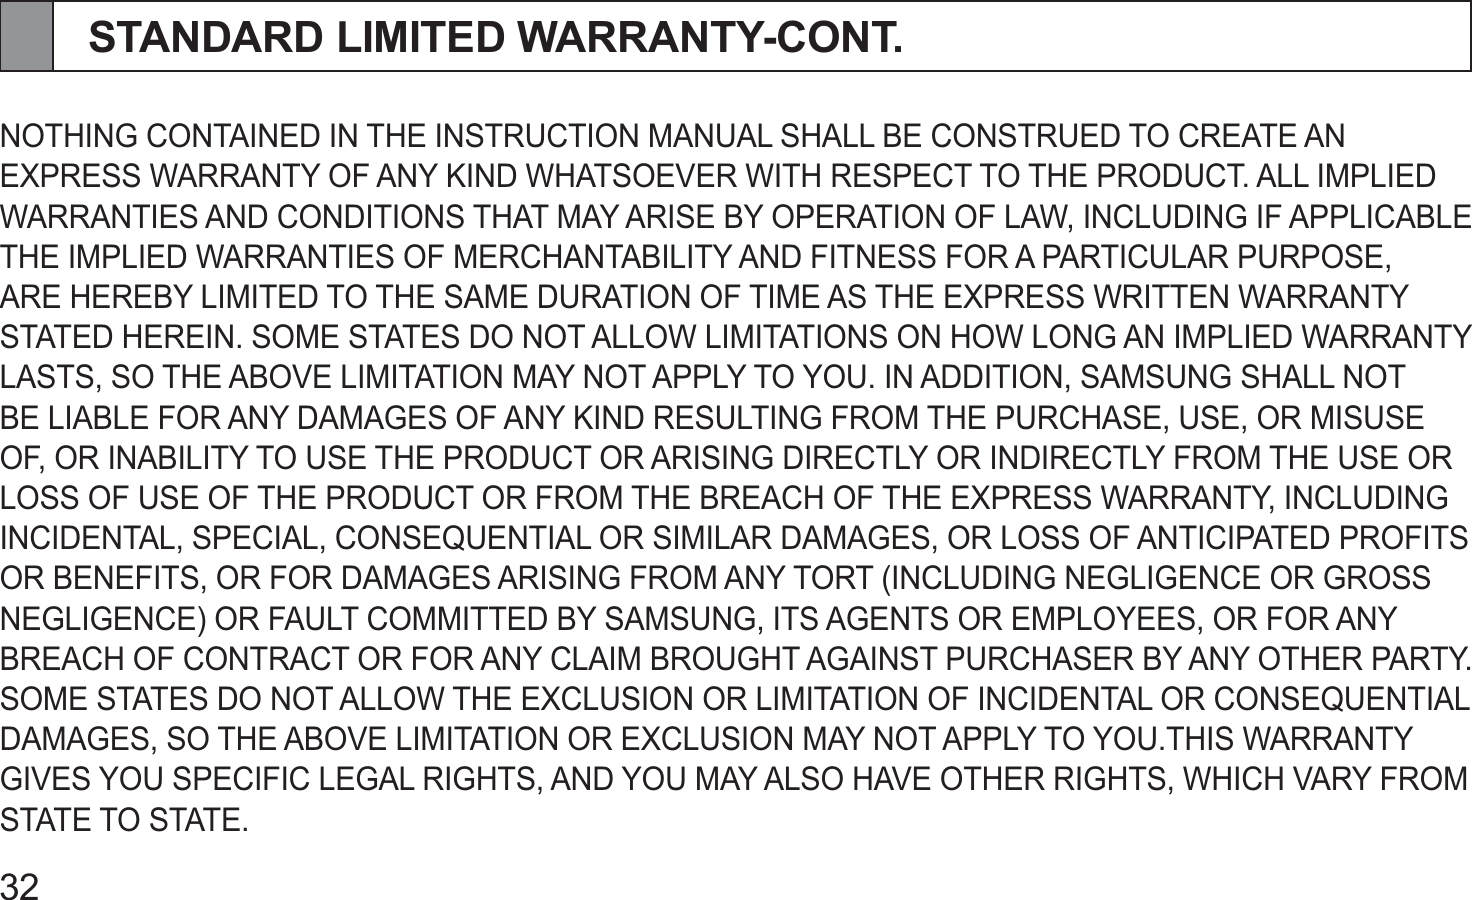 32STANDARD LIMITED WARRANTY-CONT.NOTHING CONTAINED IN THE INSTRUCTION MANUAL SHALL BE CONSTRUED TO CREATE AN EXPRESS WARRANTY OF ANY KIND WHATSOEVER WITH RESPECT TO THE PRODUCT. ALL IMPLIED WARRANTIES AND CONDITIONS THAT MAY ARISE BY OPERATION OF LAW, INCLUDING IF APPLICABLE THE IMPLIED WARRANTIES OF MERCHANTABILITY AND FITNESS FOR A PARTICULAR PURPOSE, ARE HEREBY LIMITED TO THE SAME DURATION OF TIME AS THE EXPRESS WRITTEN WARRANTY STATED HEREIN. SOME STATES DO NOT ALLOW LIMITATIONS ON HOW LONG AN IMPLIED WARRANTY LASTS, SO THE ABOVE LIMITATION MAY NOT APPLY TO YOU. IN ADDITION, SAMSUNG SHALL NOT BE LIABLE FOR ANY DAMAGES OF ANY KIND RESULTING FROM THE PURCHASE, USE, OR MISUSE OF, OR INABILITY TO USE THE PRODUCT OR ARISING DIRECTLY OR INDIRECTLY FROM THE USE OR LOSS OF USE OF THE PRODUCT OR FROM THE BREACH OF THE EXPRESS WARRANTY, INCLUDING INCIDENTAL, SPECIAL, CONSEQUENTIAL OR SIMILAR DAMAGES, OR LOSS OF ANTICIPATED PROFITS OR BENEFITS, OR FOR DAMAGES ARISING FROM ANY TORT (INCLUDING NEGLIGENCE OR GROSS NEGLIGENCE) OR FAULT COMMITTED BY SAMSUNG, ITS AGENTS OR EMPLOYEES, OR FOR ANY BREACH OF CONTRACT OR FOR ANY CLAIM BROUGHT AGAINST PURCHASER BY ANY OTHER PARTY. SOME STATES DO NOT ALLOW THE EXCLUSION OR LIMITATION OF INCIDENTAL OR CONSEQUENTIAL DAMAGES, SO THE ABOVE LIMITATION OR EXCLUSION MAY NOT APPLY TO YOU.THIS WARRANTY GIVES YOU SPECIFIC LEGAL RIGHTS, AND YOU MAY ALSO HAVE OTHER RIGHTS, WHICH VARY FROM STATE TO STATE.